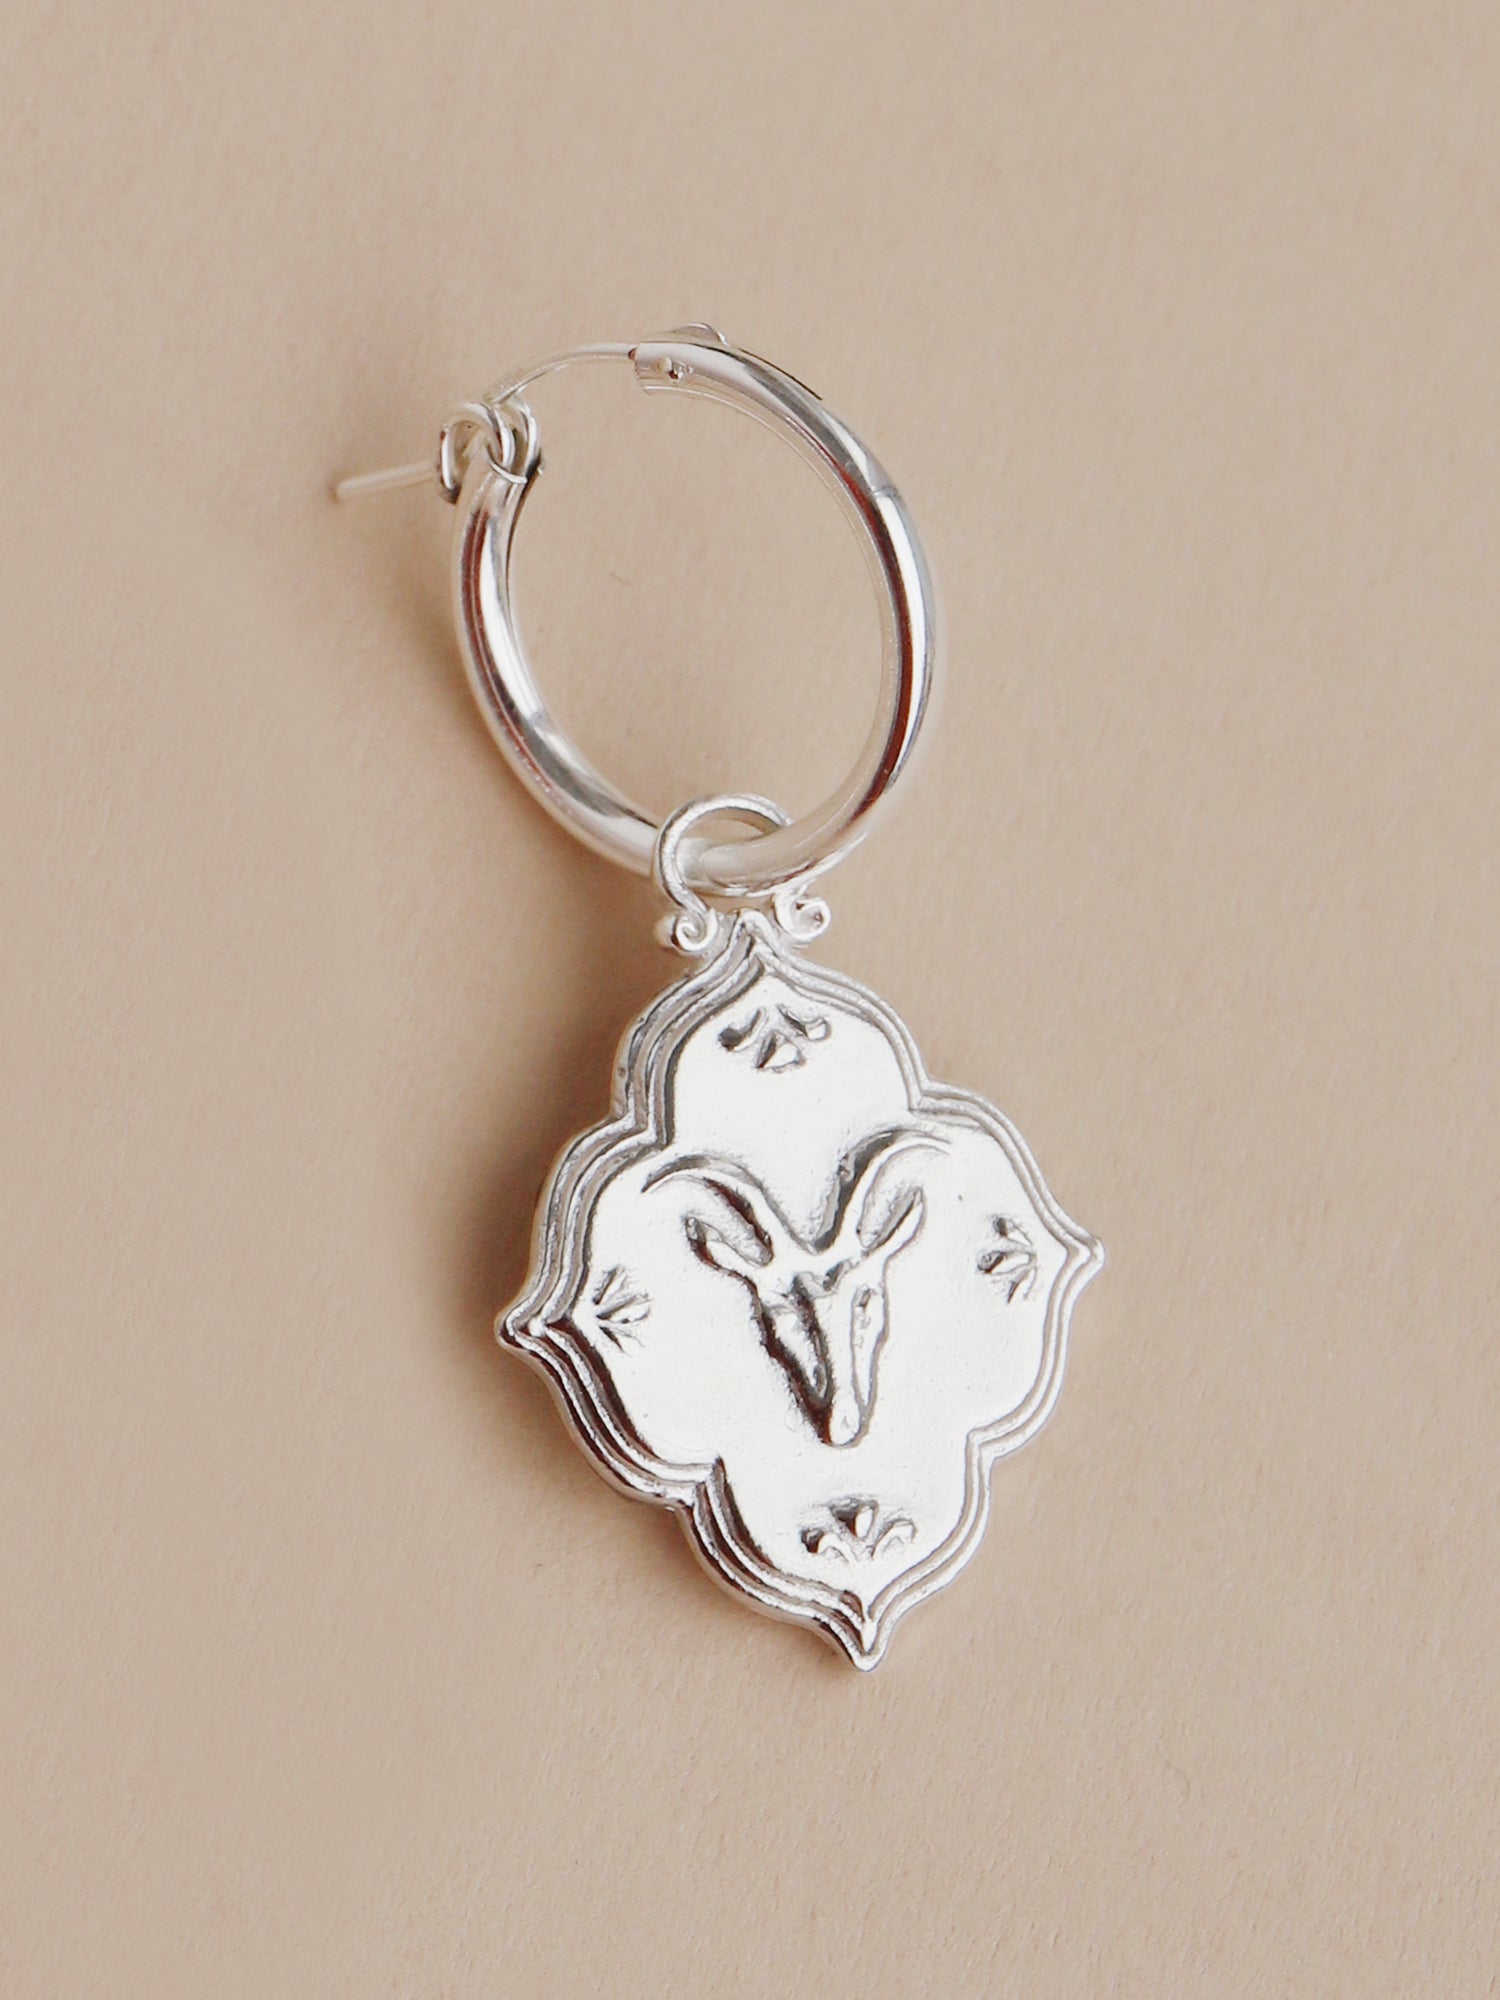 Capricorn - Individual Charm in Silver